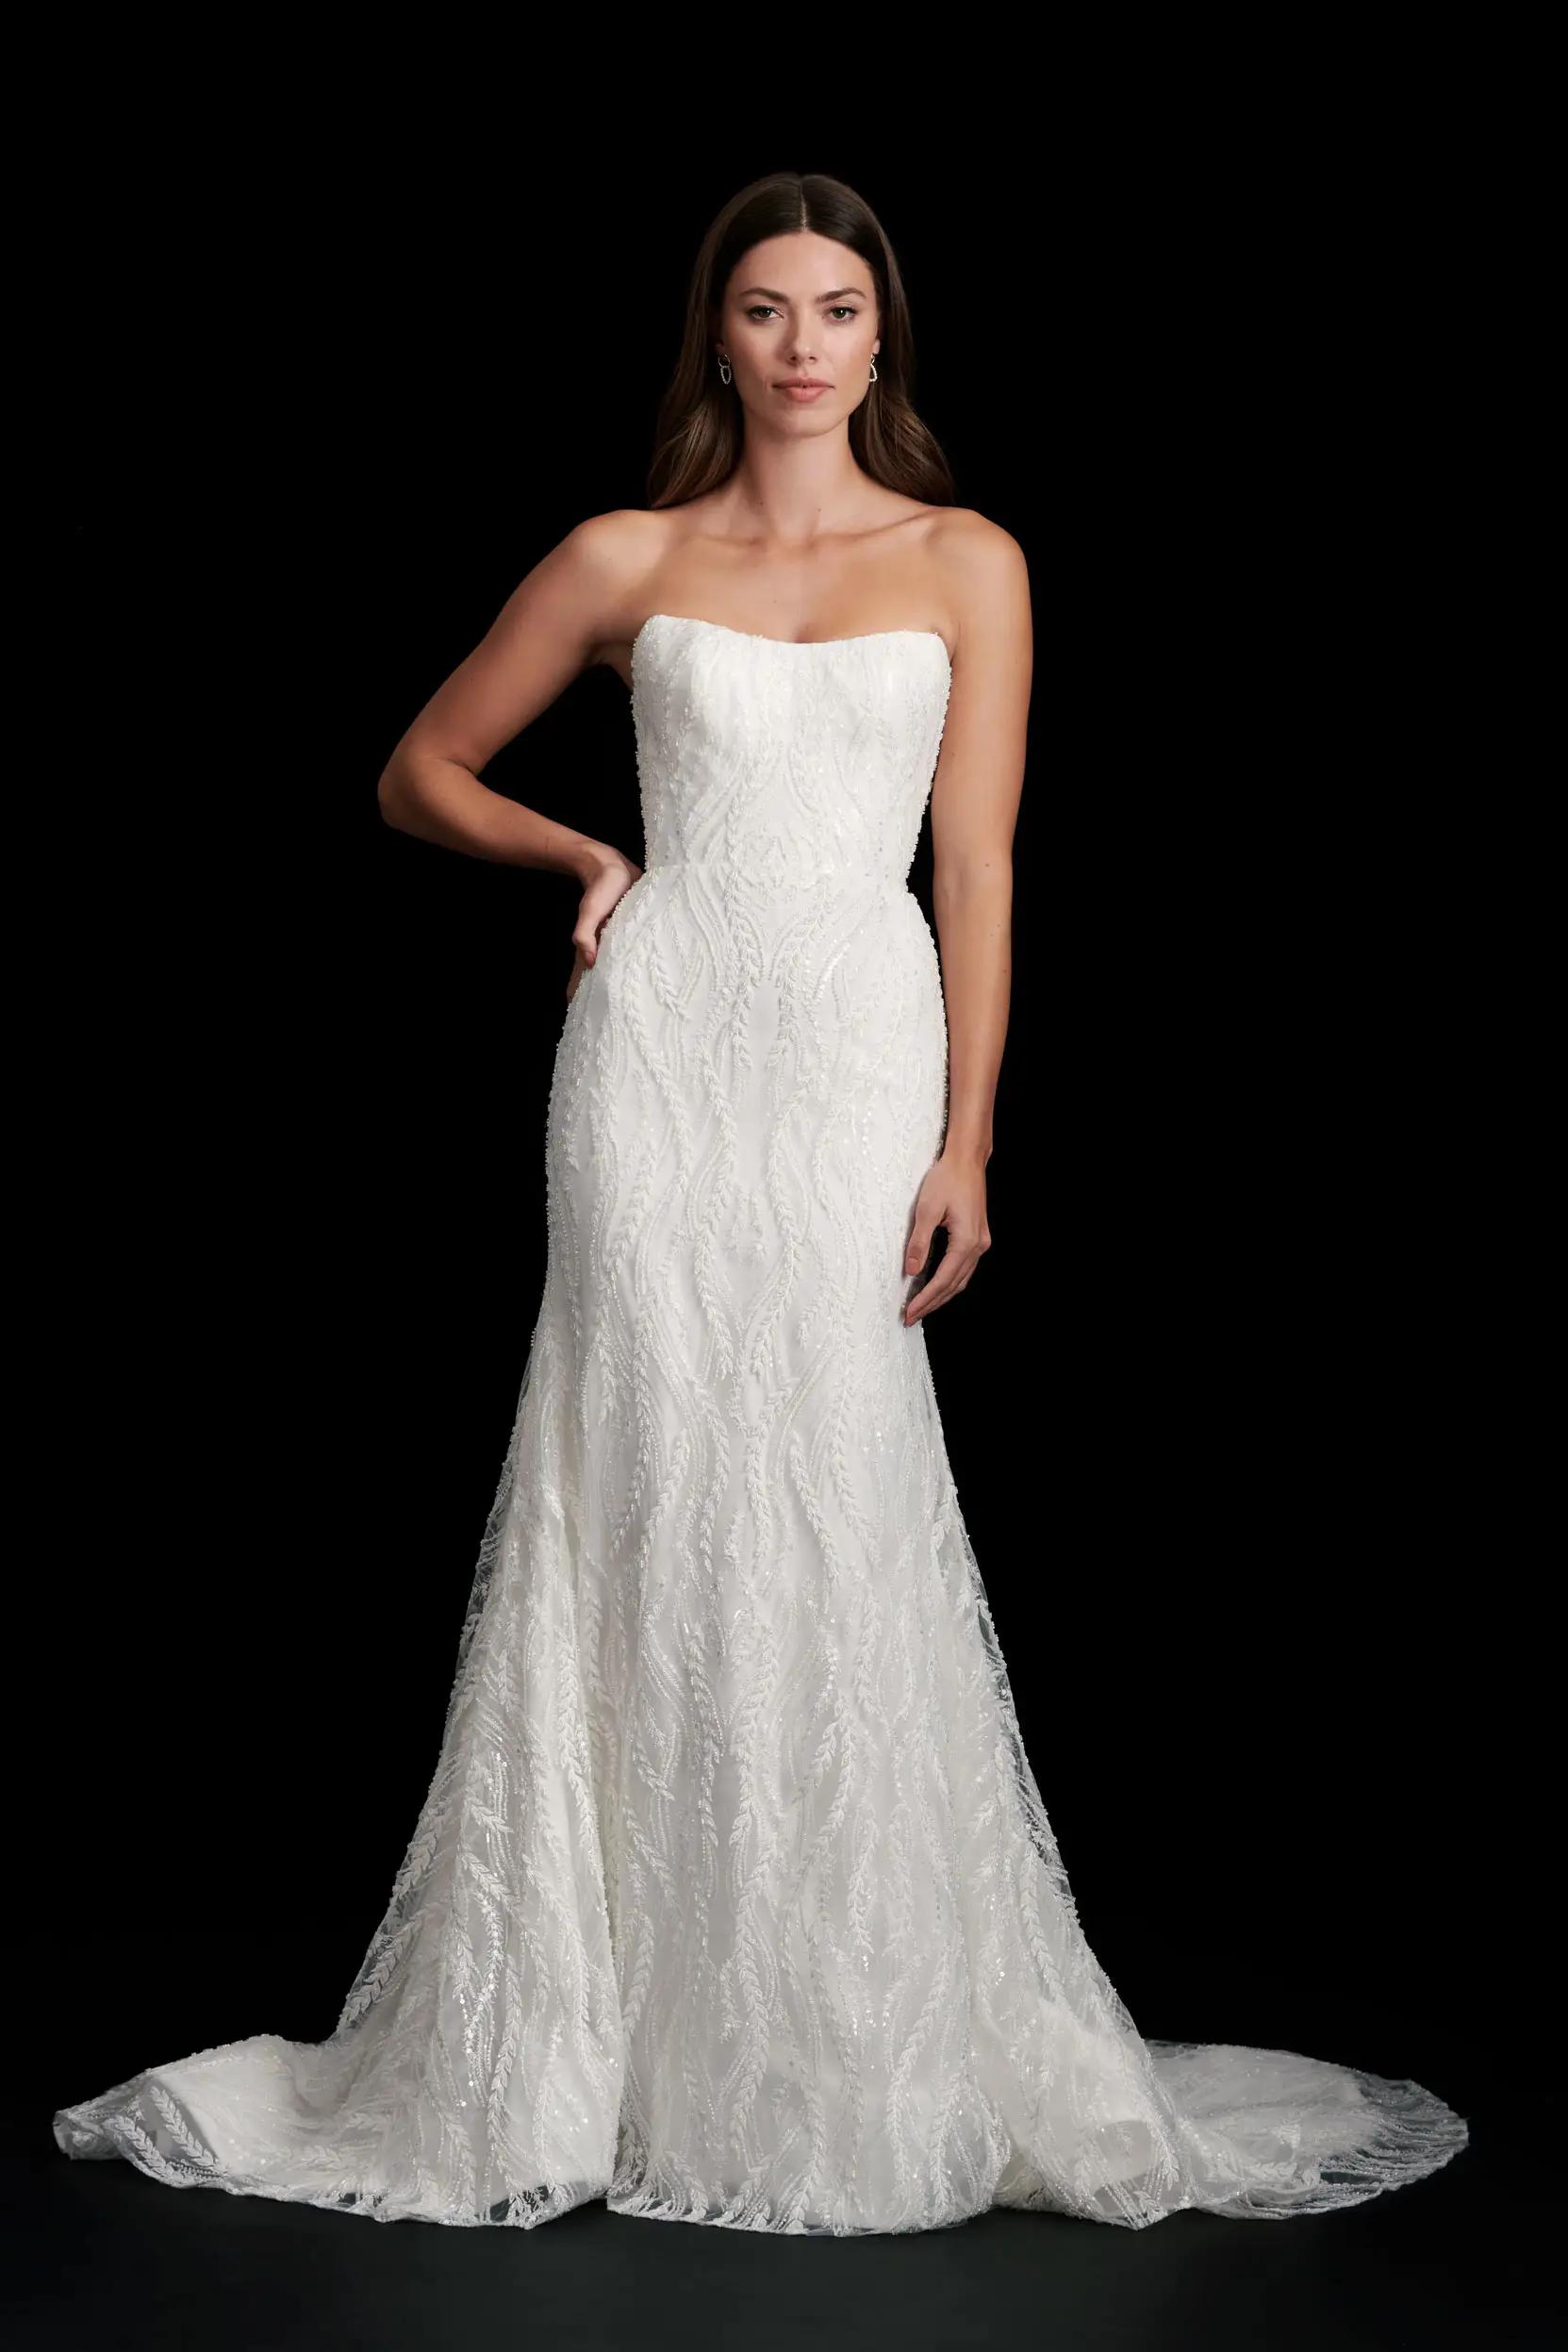 Eugenie beaded wedding dress with soft scoop neckline and fitted skirt by Kelly Faetanini